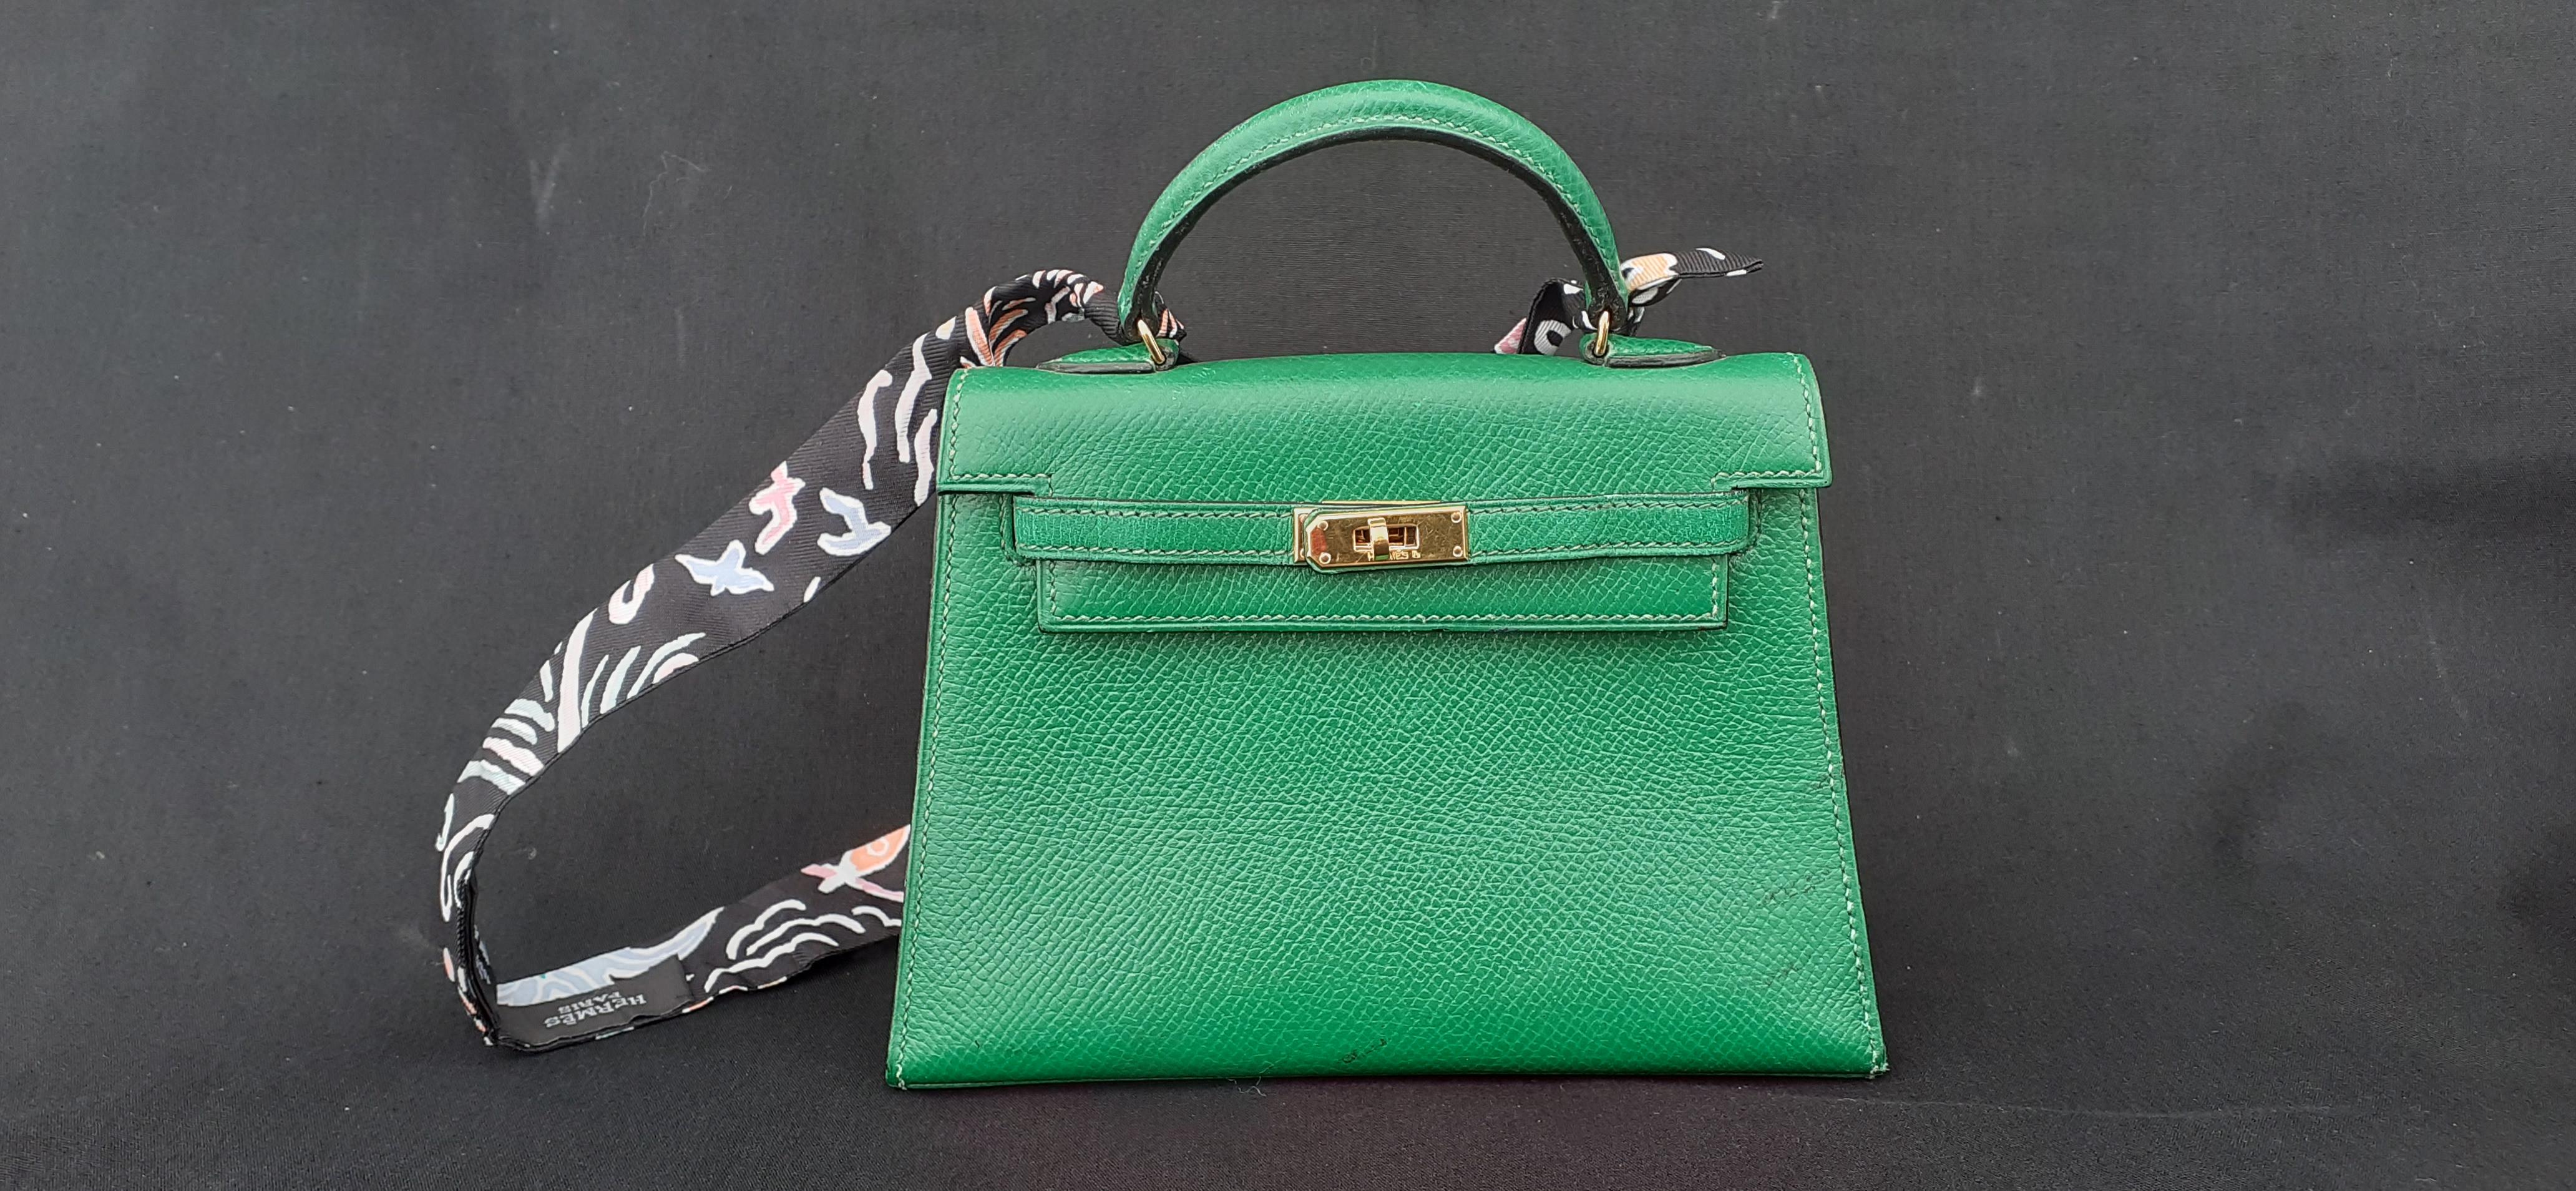 Exceptional Hermès Vintage Micro Kelly 15 cm Sellier Bag Green Leather Gold Hdw 10